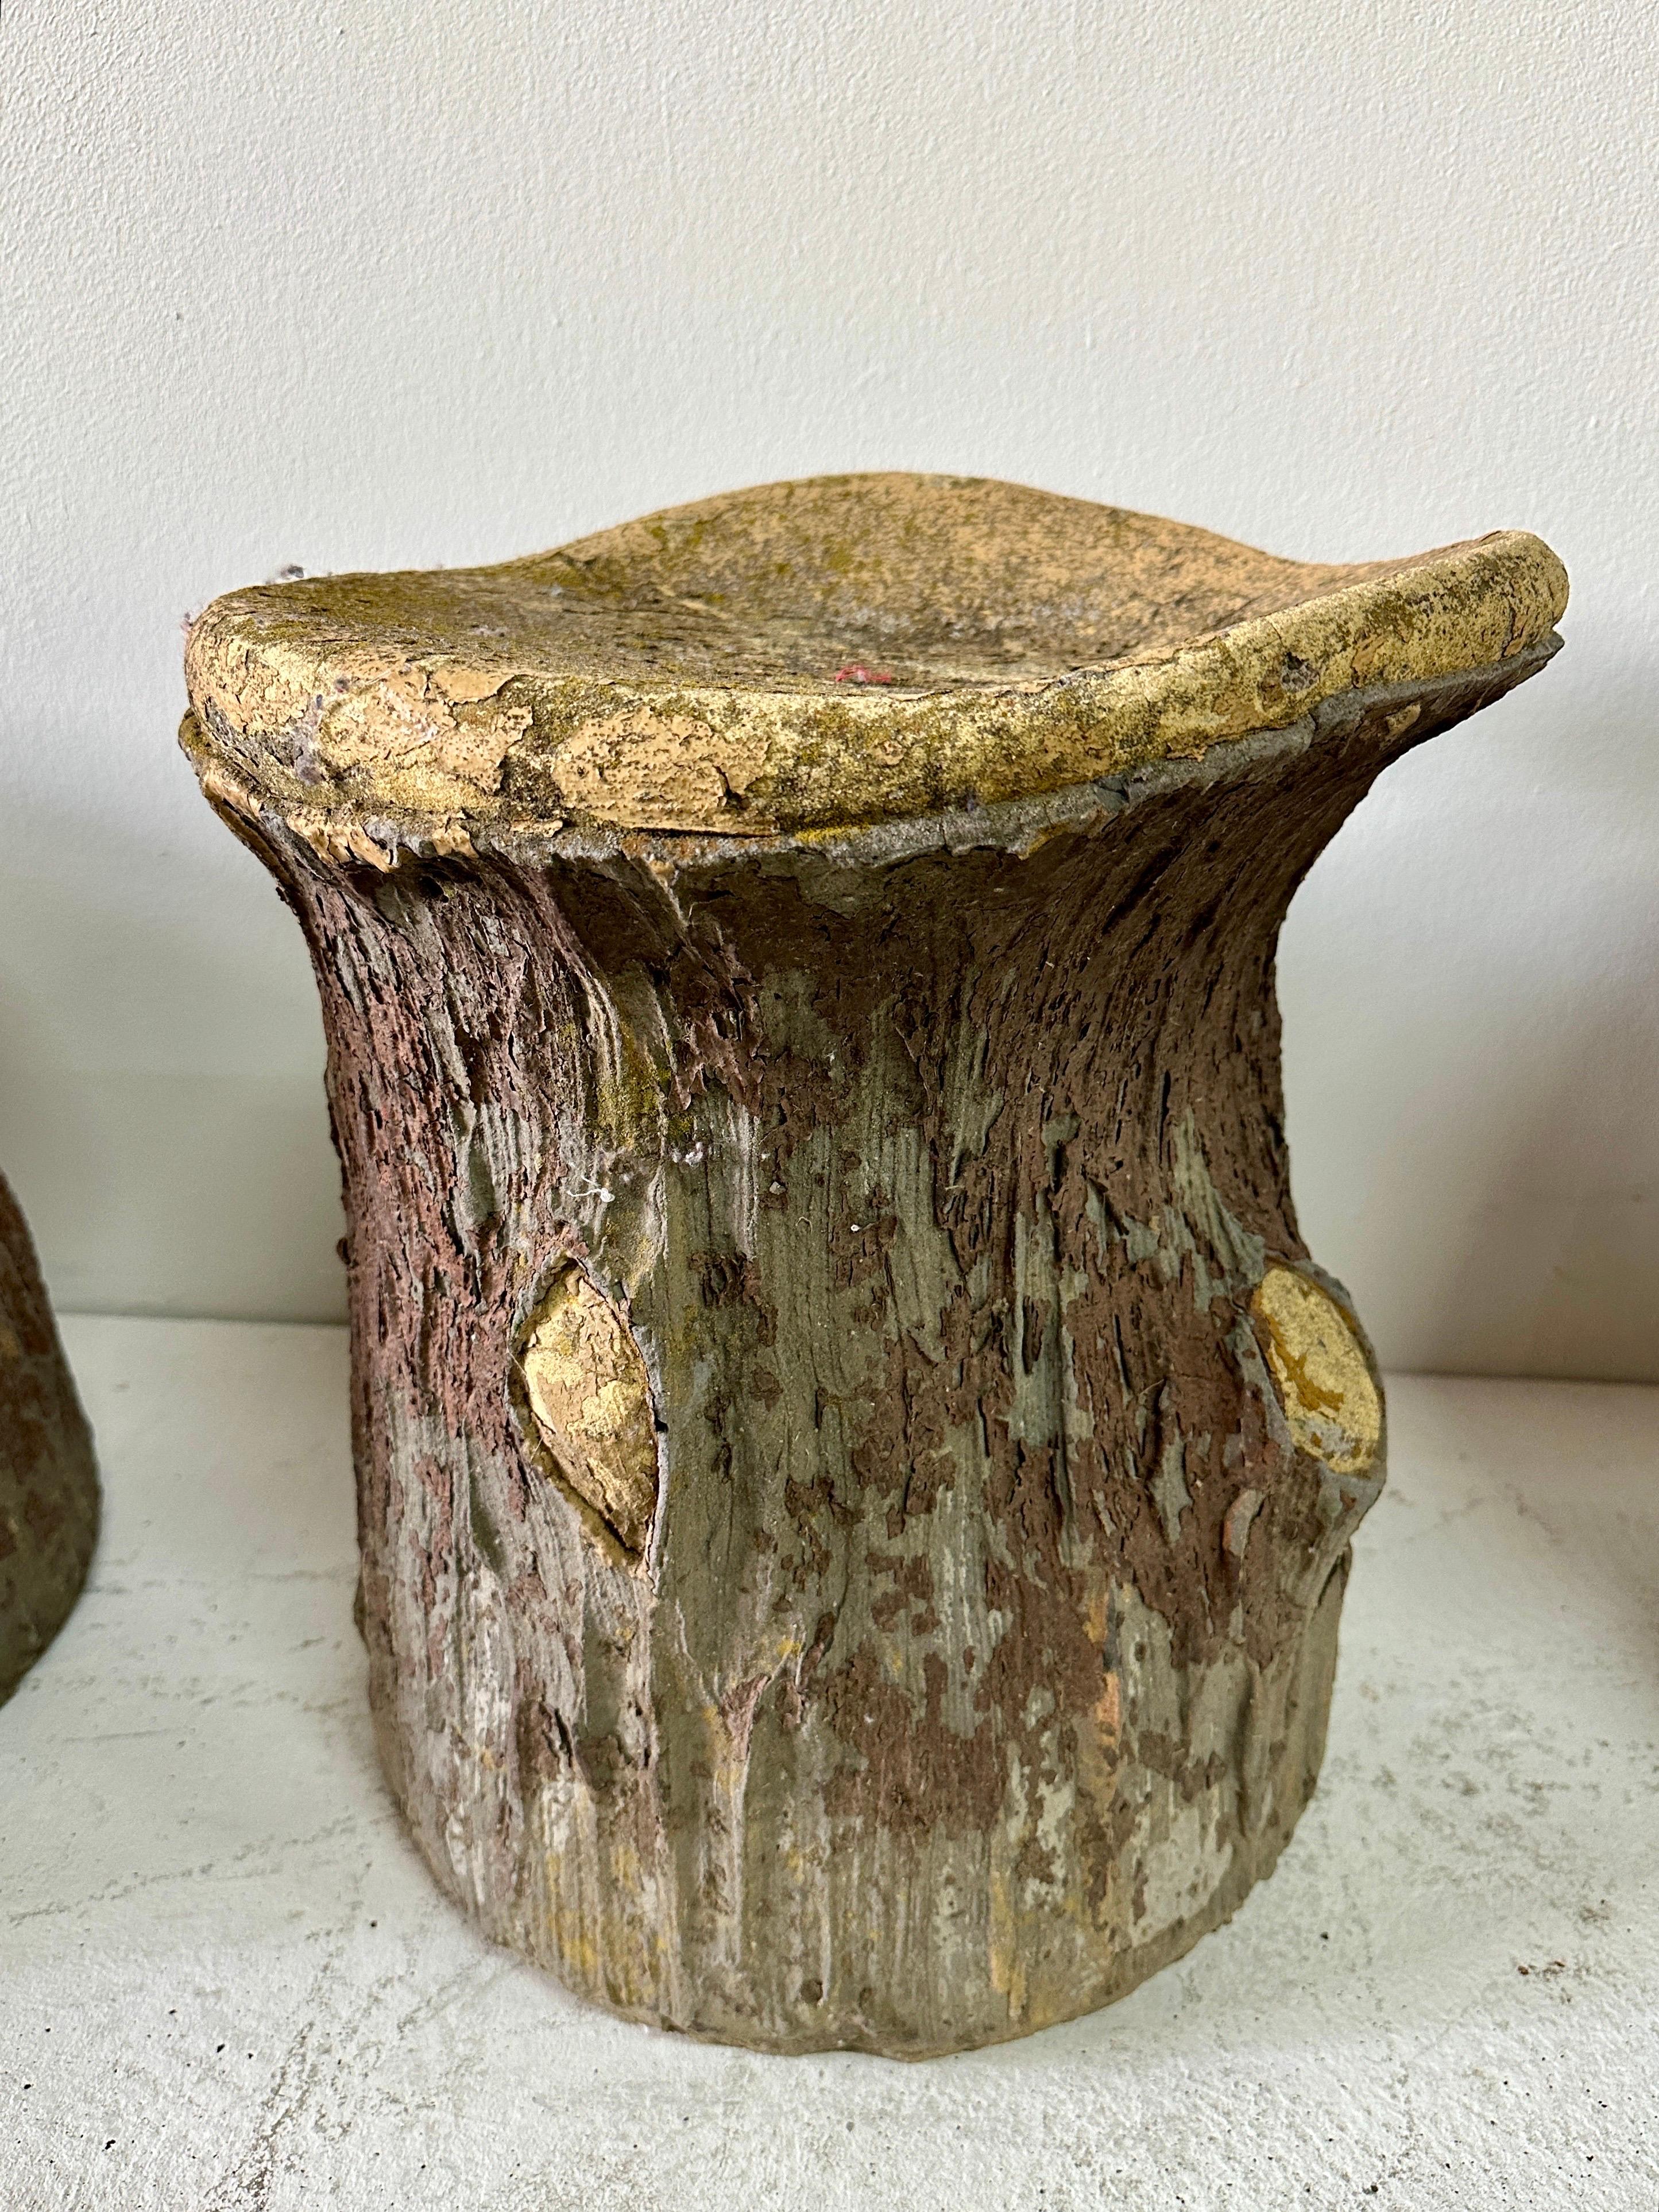 We have SEVEN (7) of these beauties available.  ALL original colors and finish providing the illusion of wood trunks and aged peeling bark exterior.  These substantial mid-century concrete faux-bois stools with so many design details. Each stool is